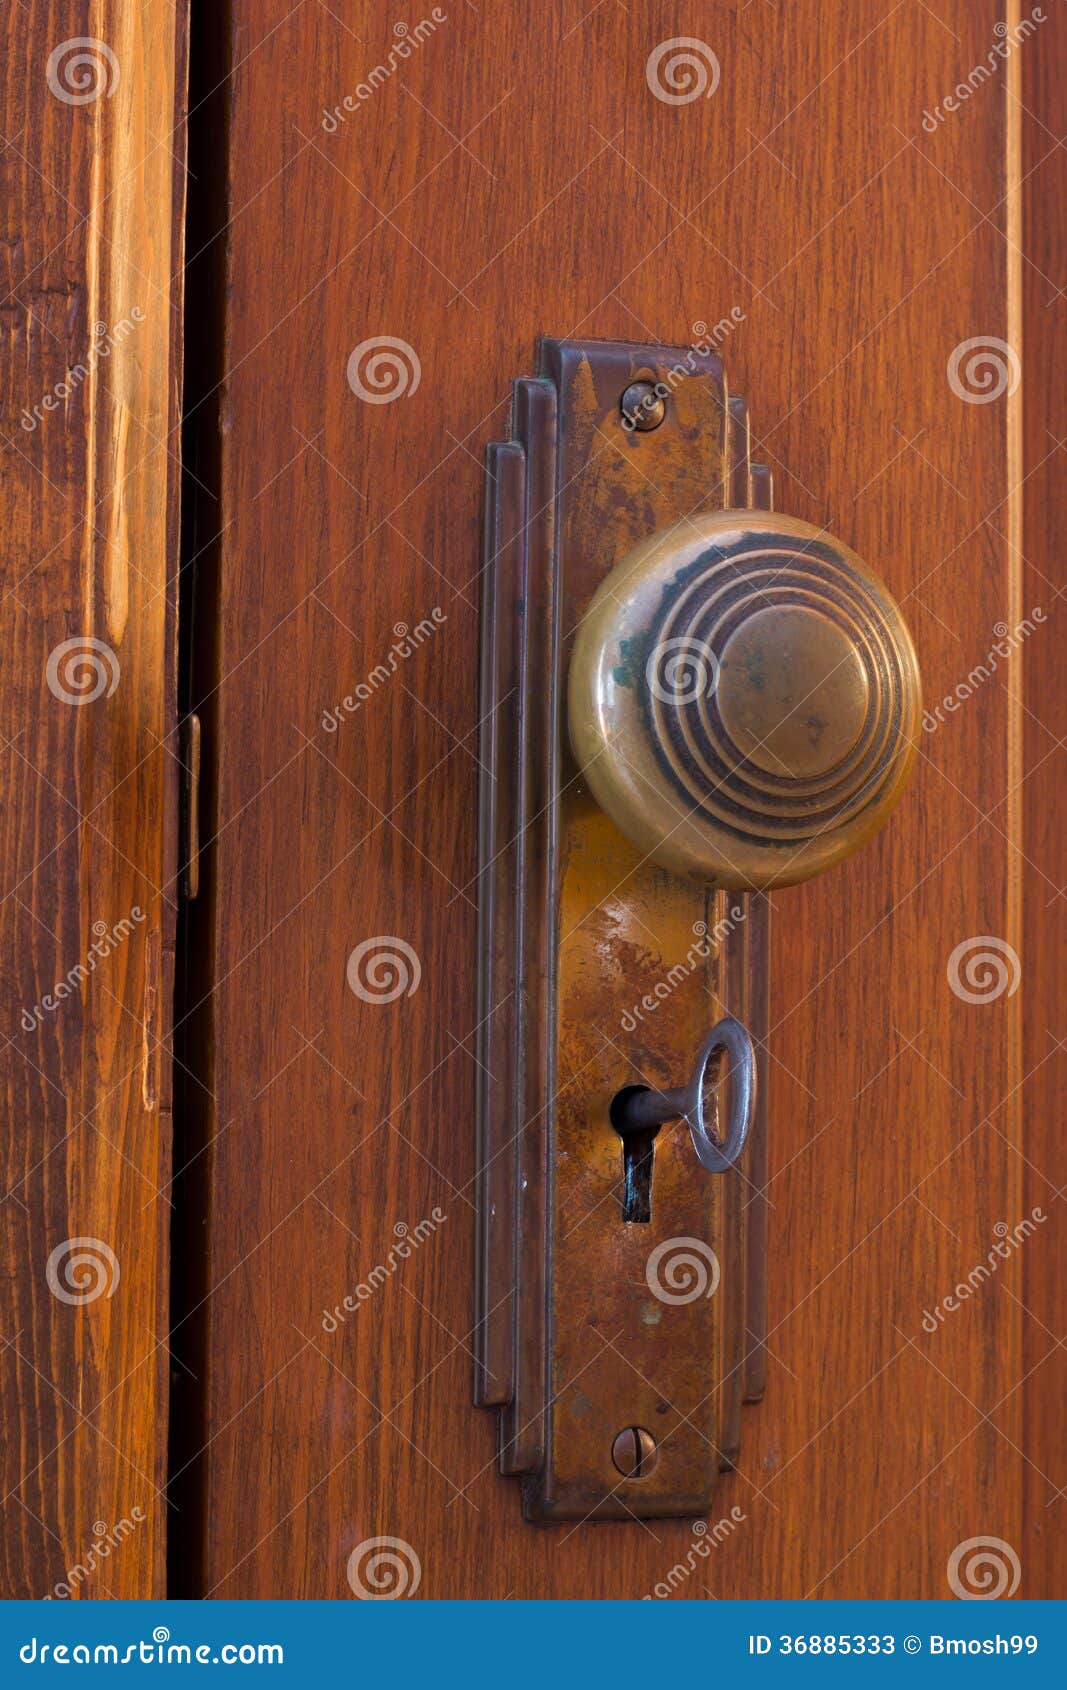 Old Door knob with key stock image. Image of home, handle - 36885333